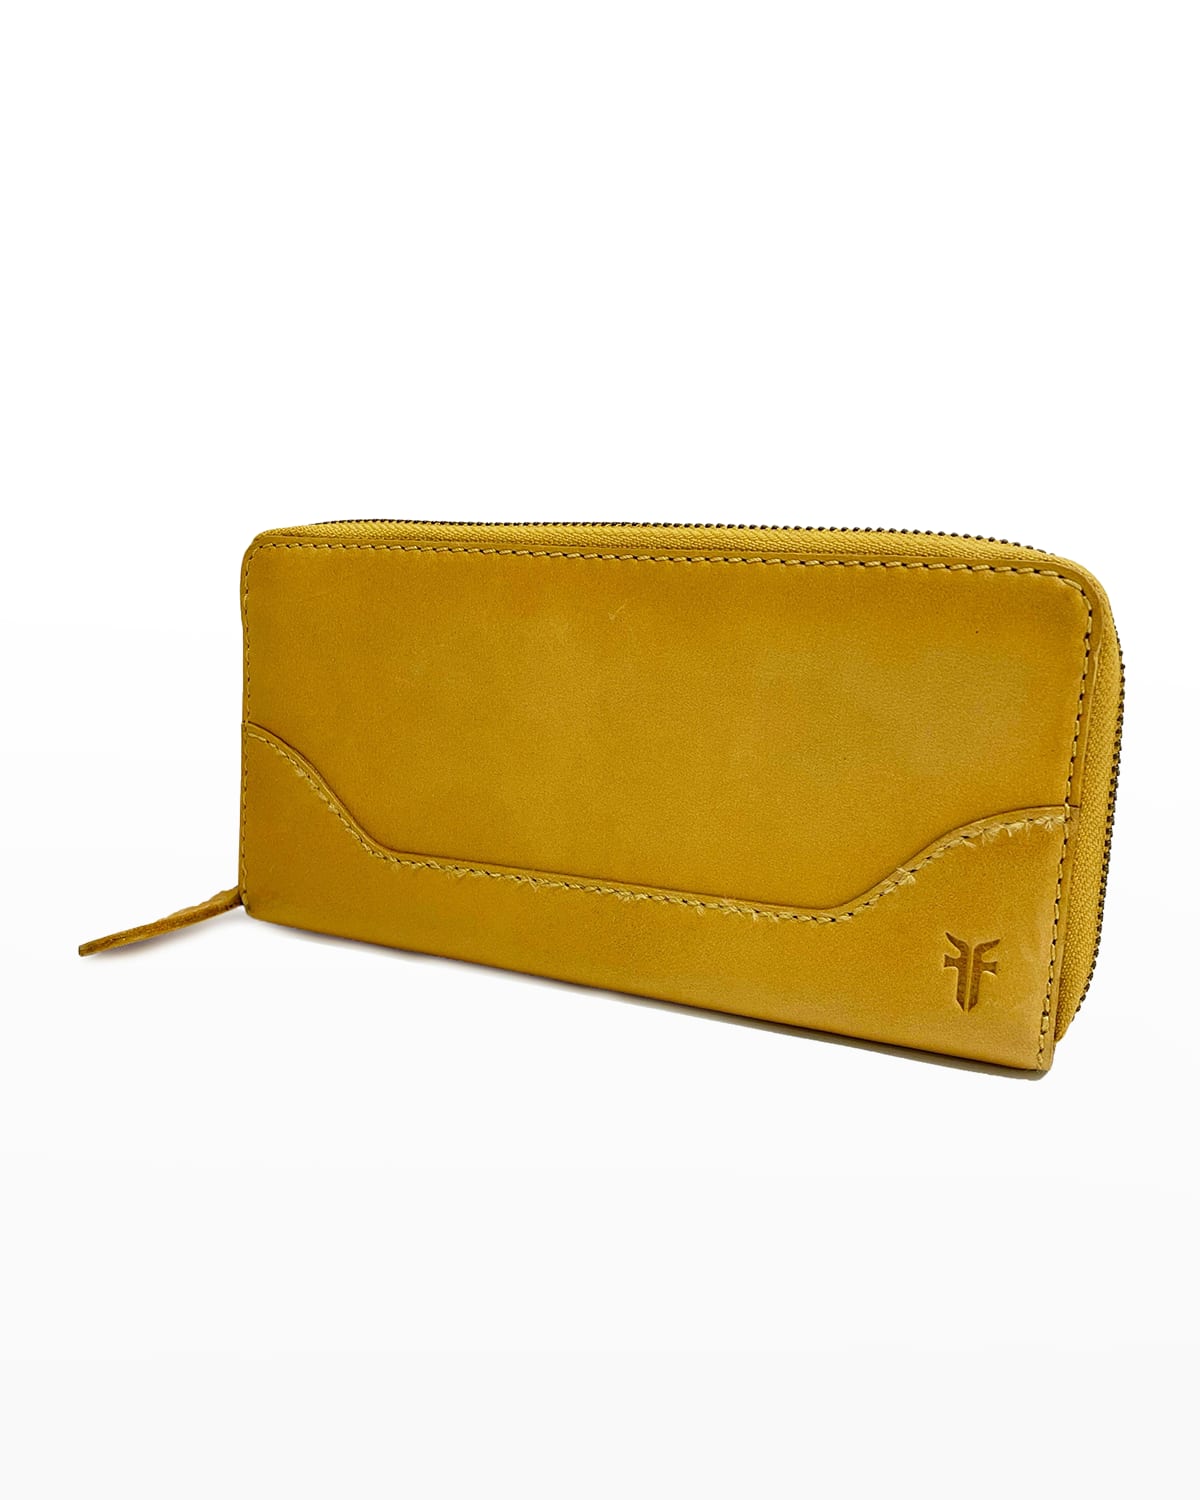 click Hinder Petitioner Continental Zip Leather Wallet | Neiman Marcus